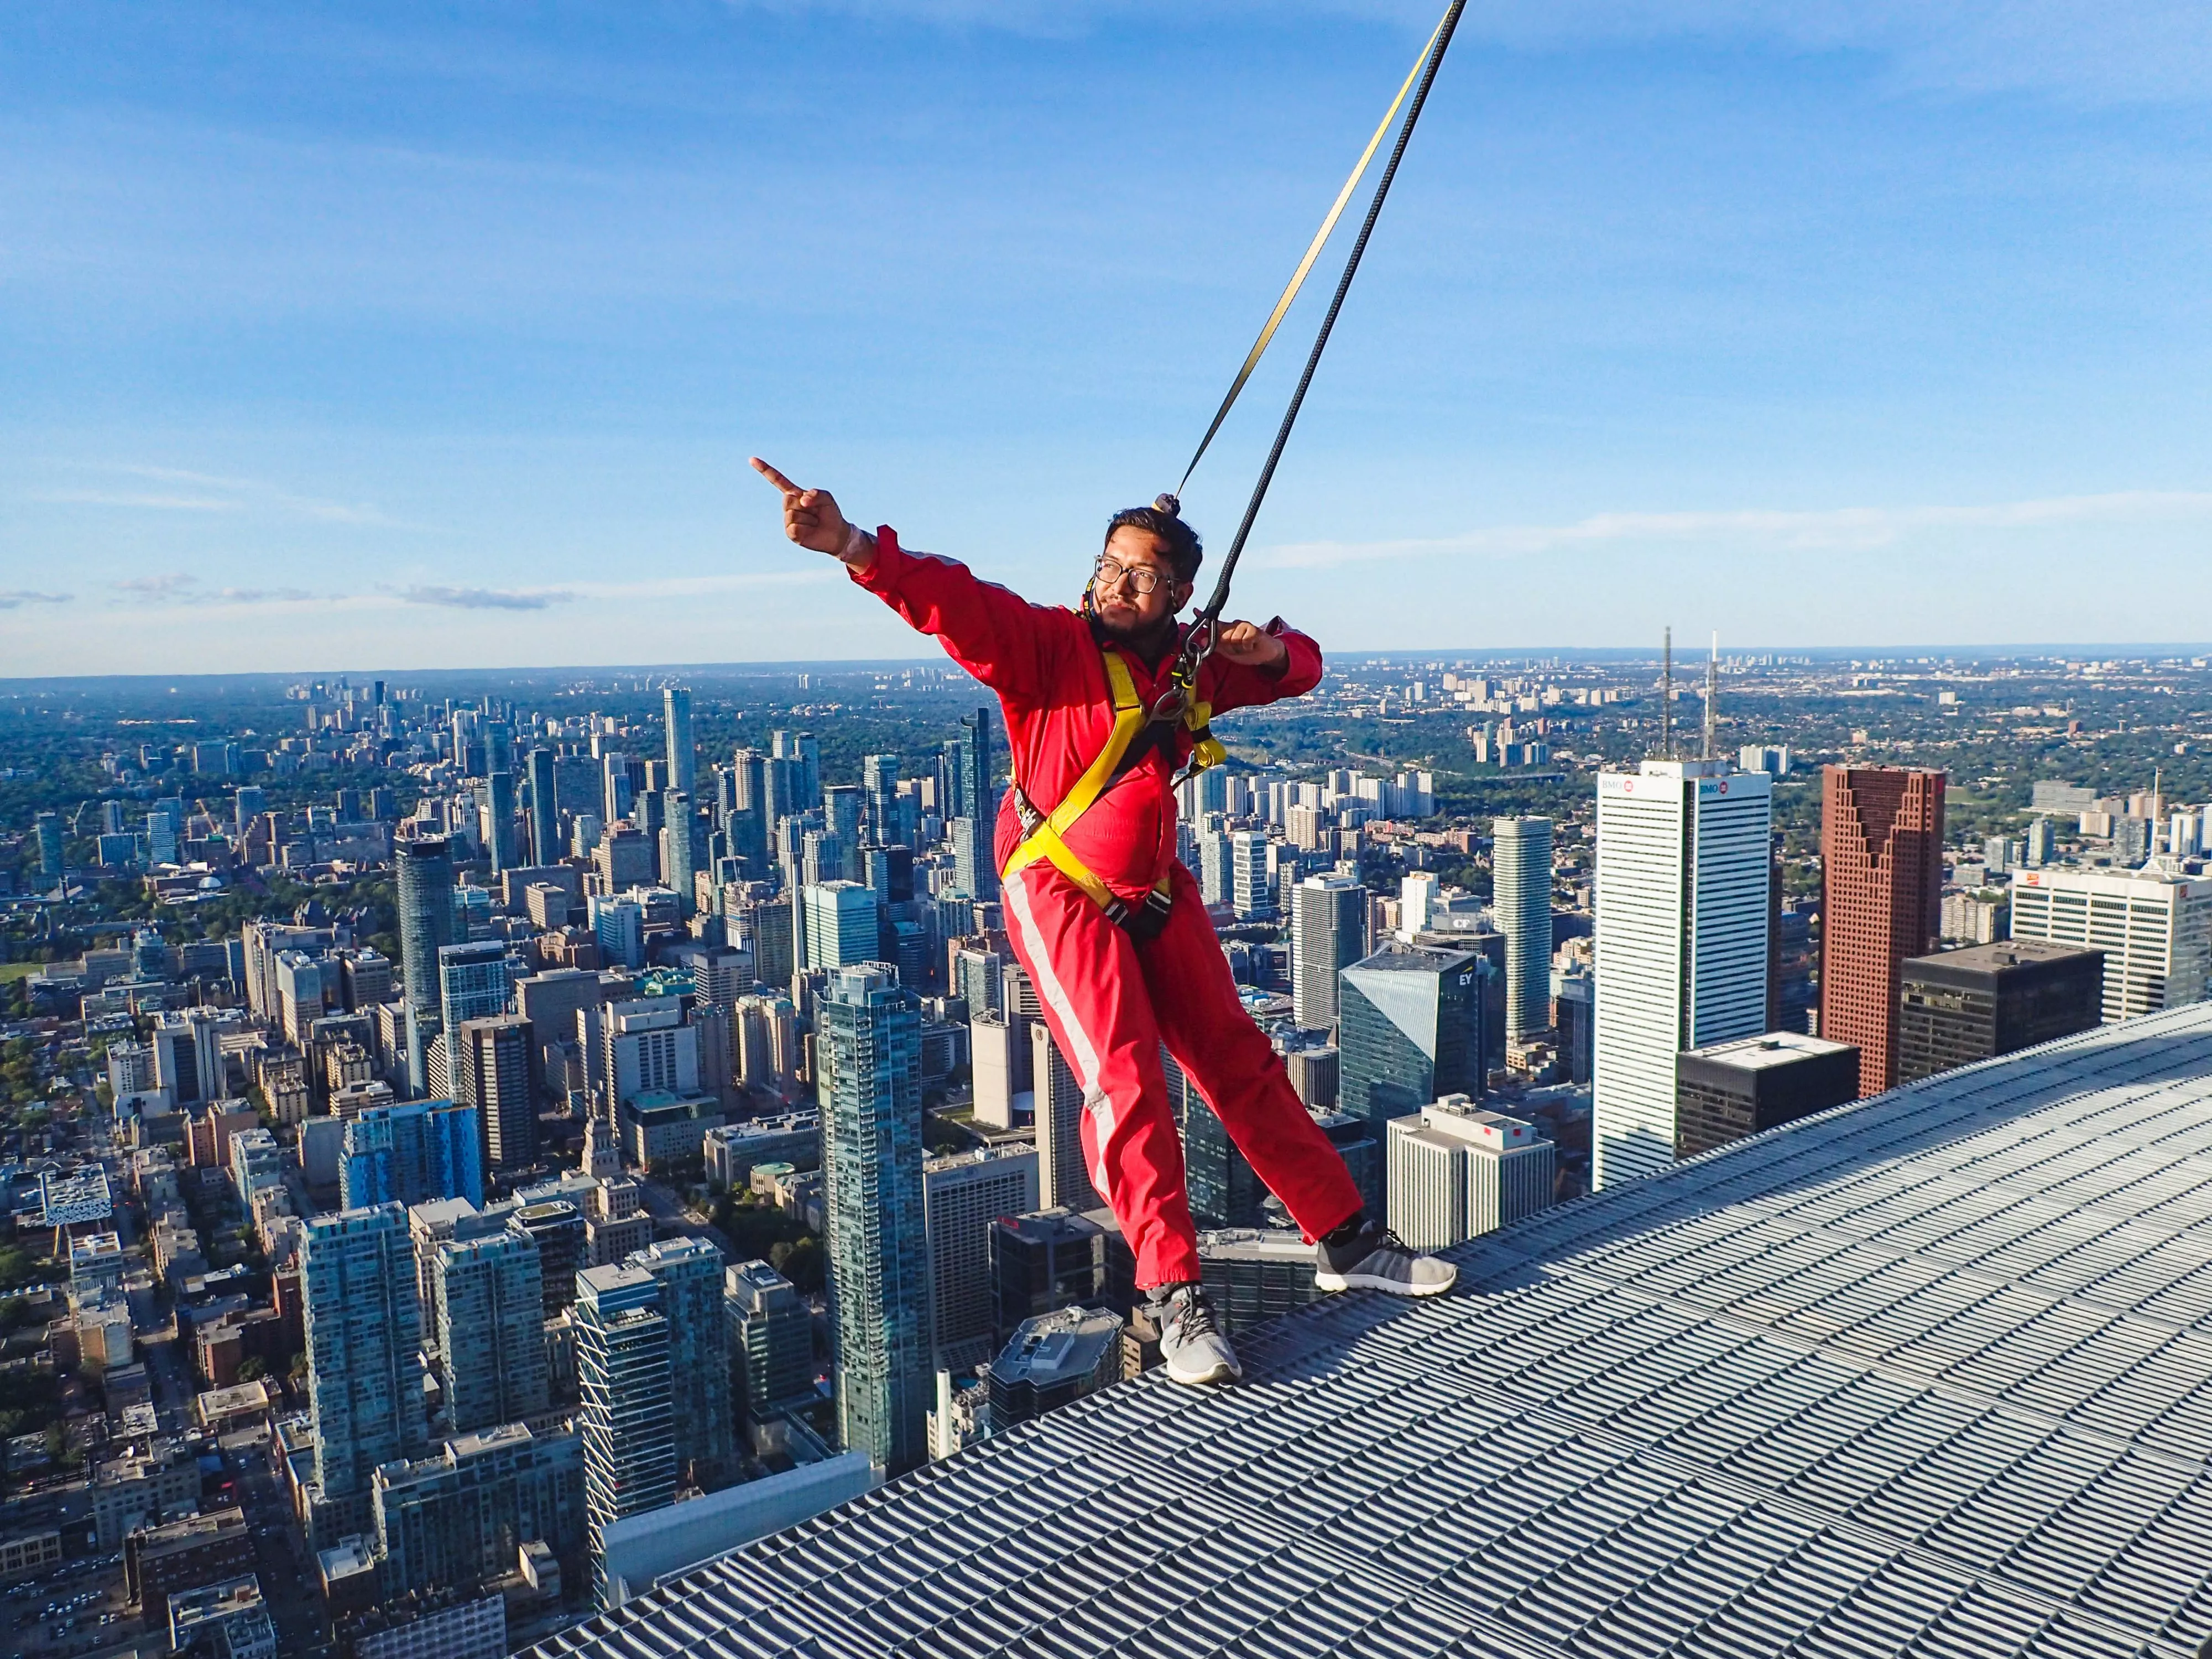 EdgeWalk at the CN Tower in Canada, North America | Amusement Parks & Rides,Adrenaline Adventures - Rated 4.1